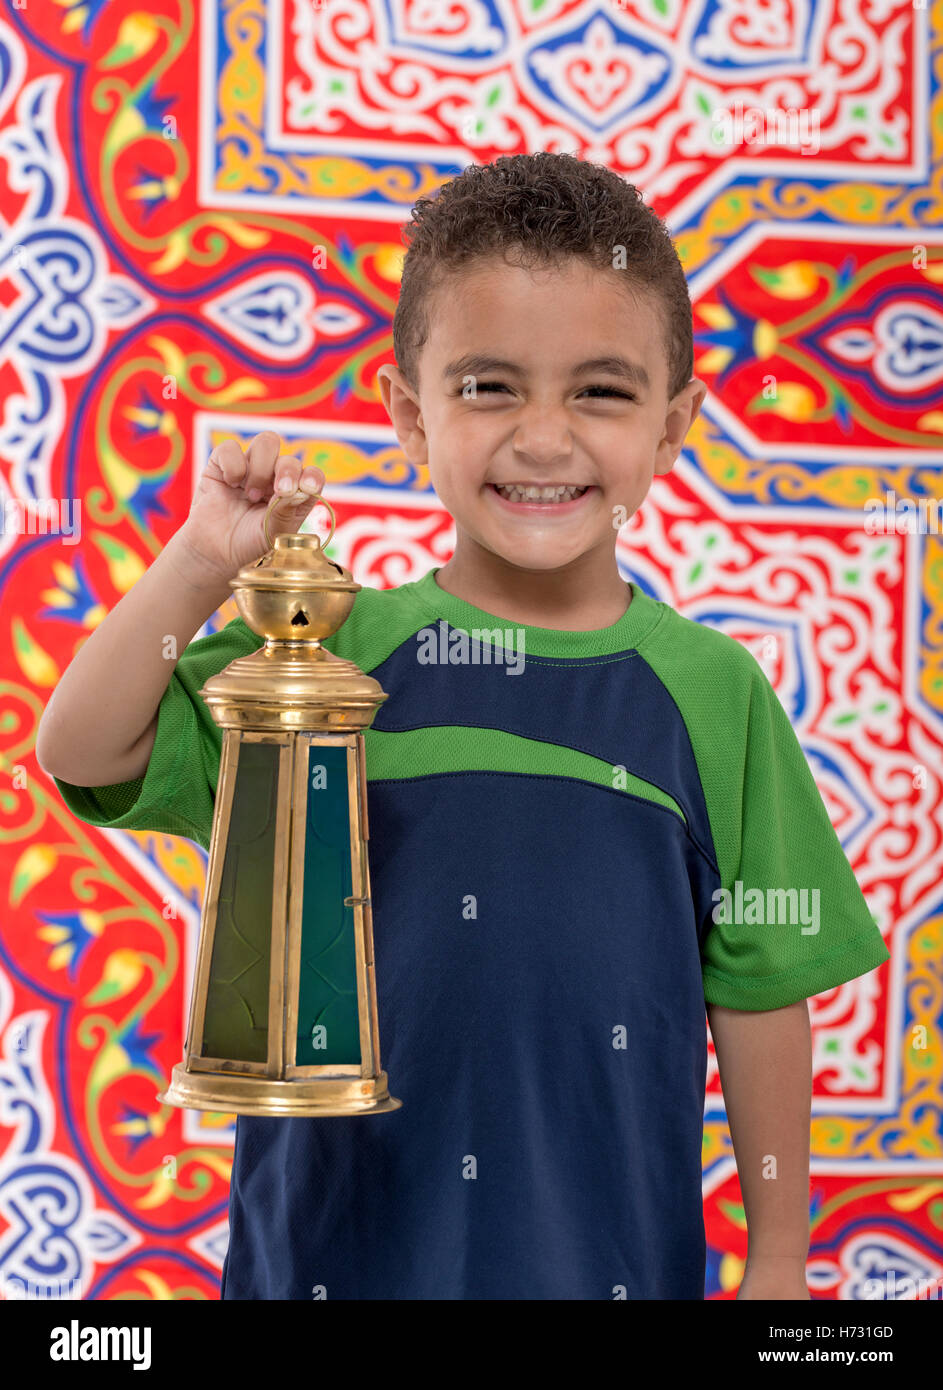 Adorable Smiling Young Boy with Vintage Lantern over Festive Ramadan Fabric Stock Photo